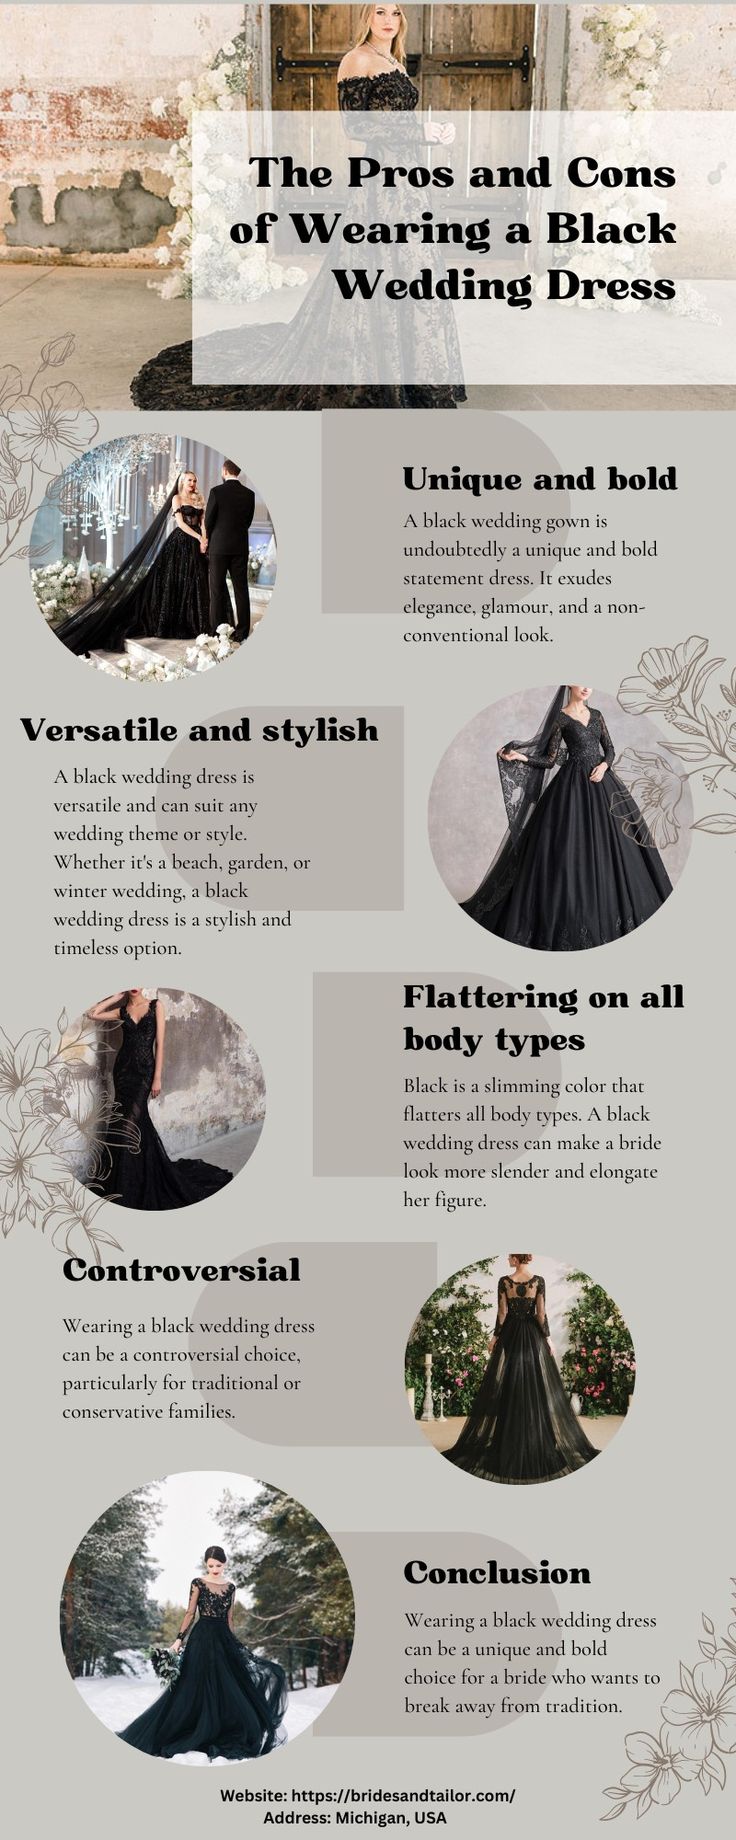 The Pros and Cons of Wearing a Black Wedding Dress in 2023 | Custom wedding dress, Black wedding gowns, Black wedding dresses